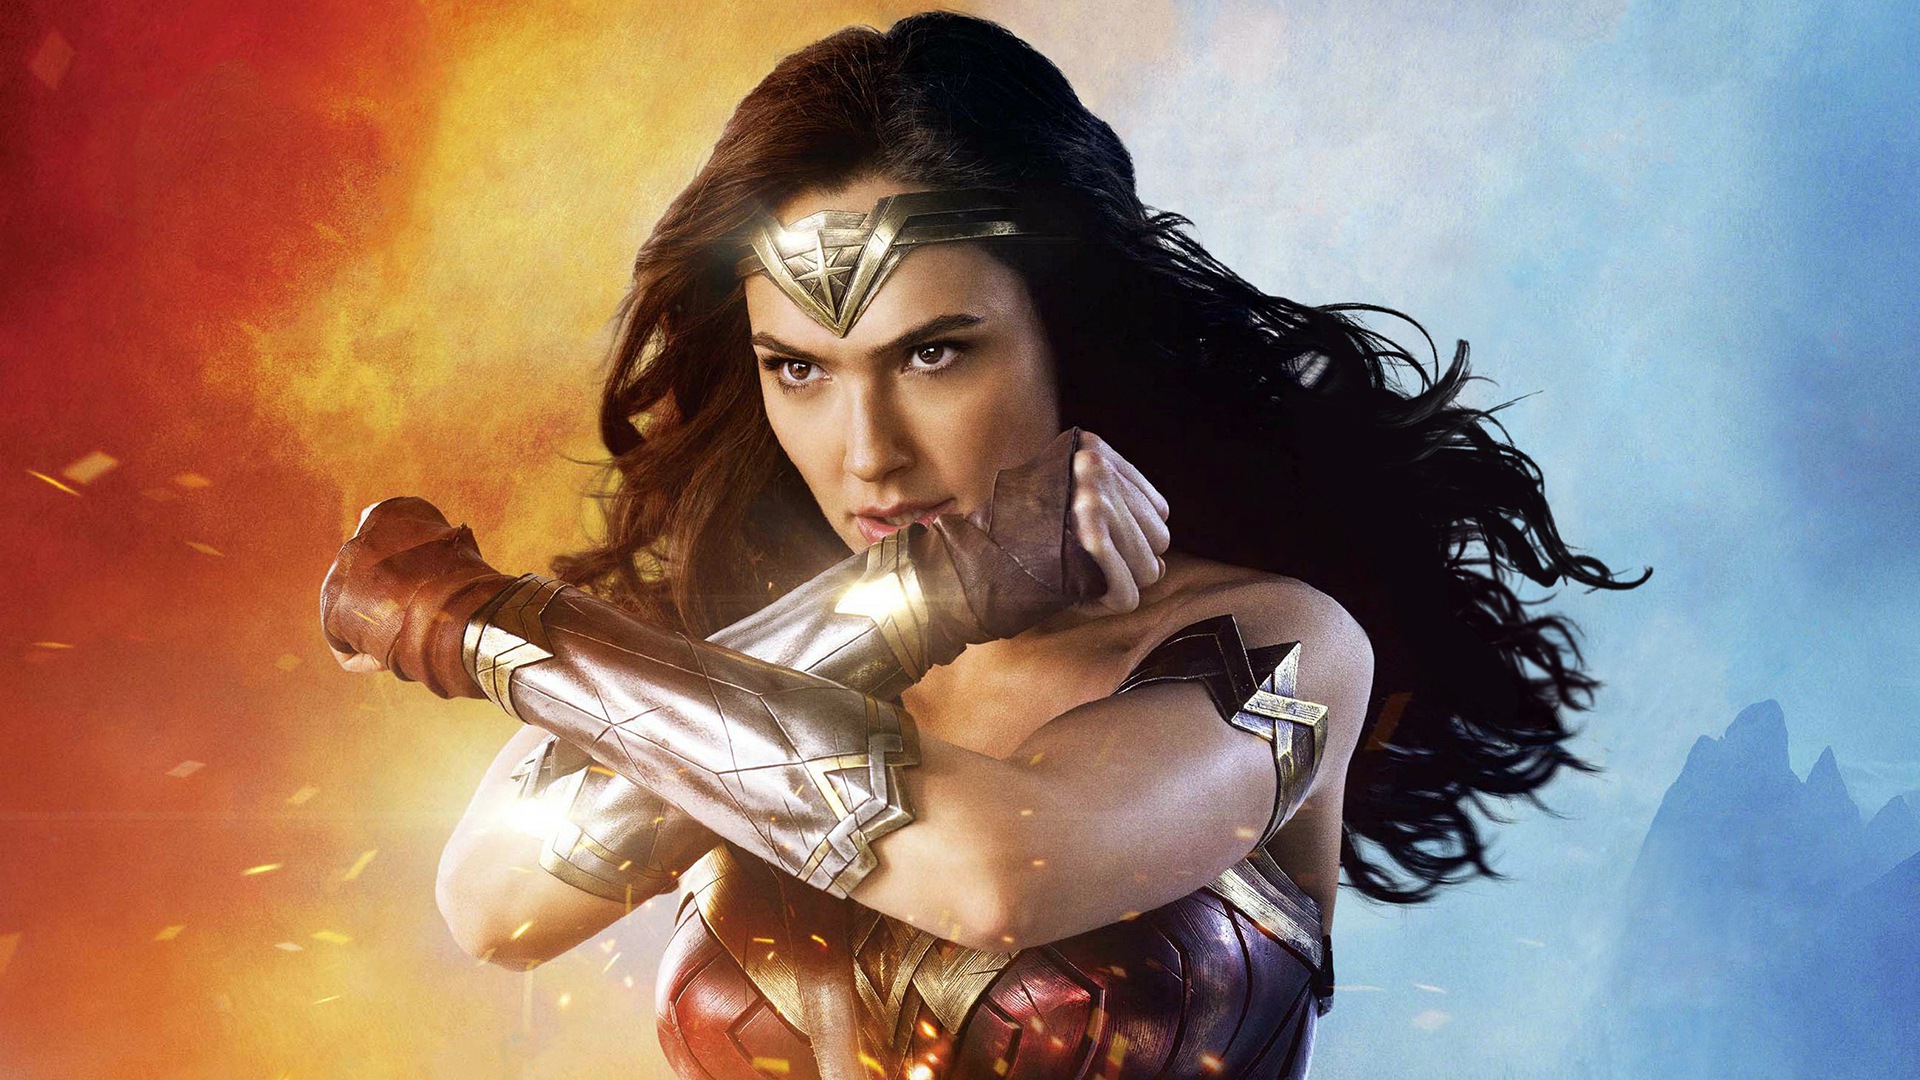 Wonder Woman crosses her arms to form her iconic pose in a promotional image from Wonder Woman 1984